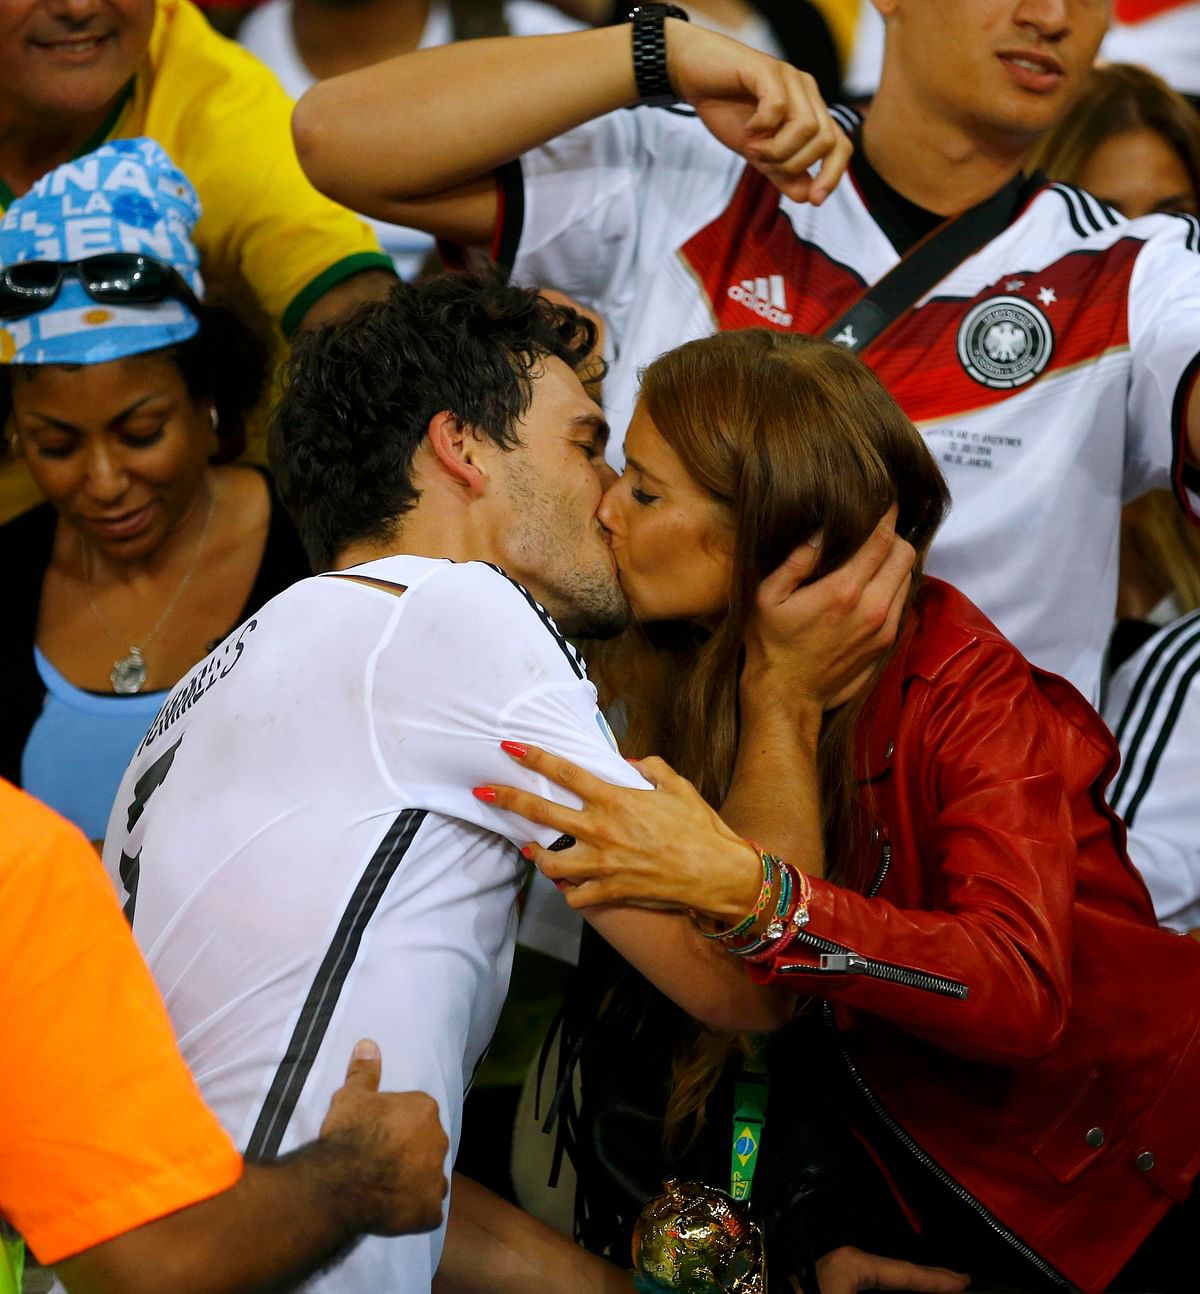 Germany's Mats Hummels kisses his girlfriend Cathy Fischer after extra time in the 2014 World Cup final between Germany and Argentina at the Maracana stadium in Rio de Janeiro on July 13, 2014. Reuters